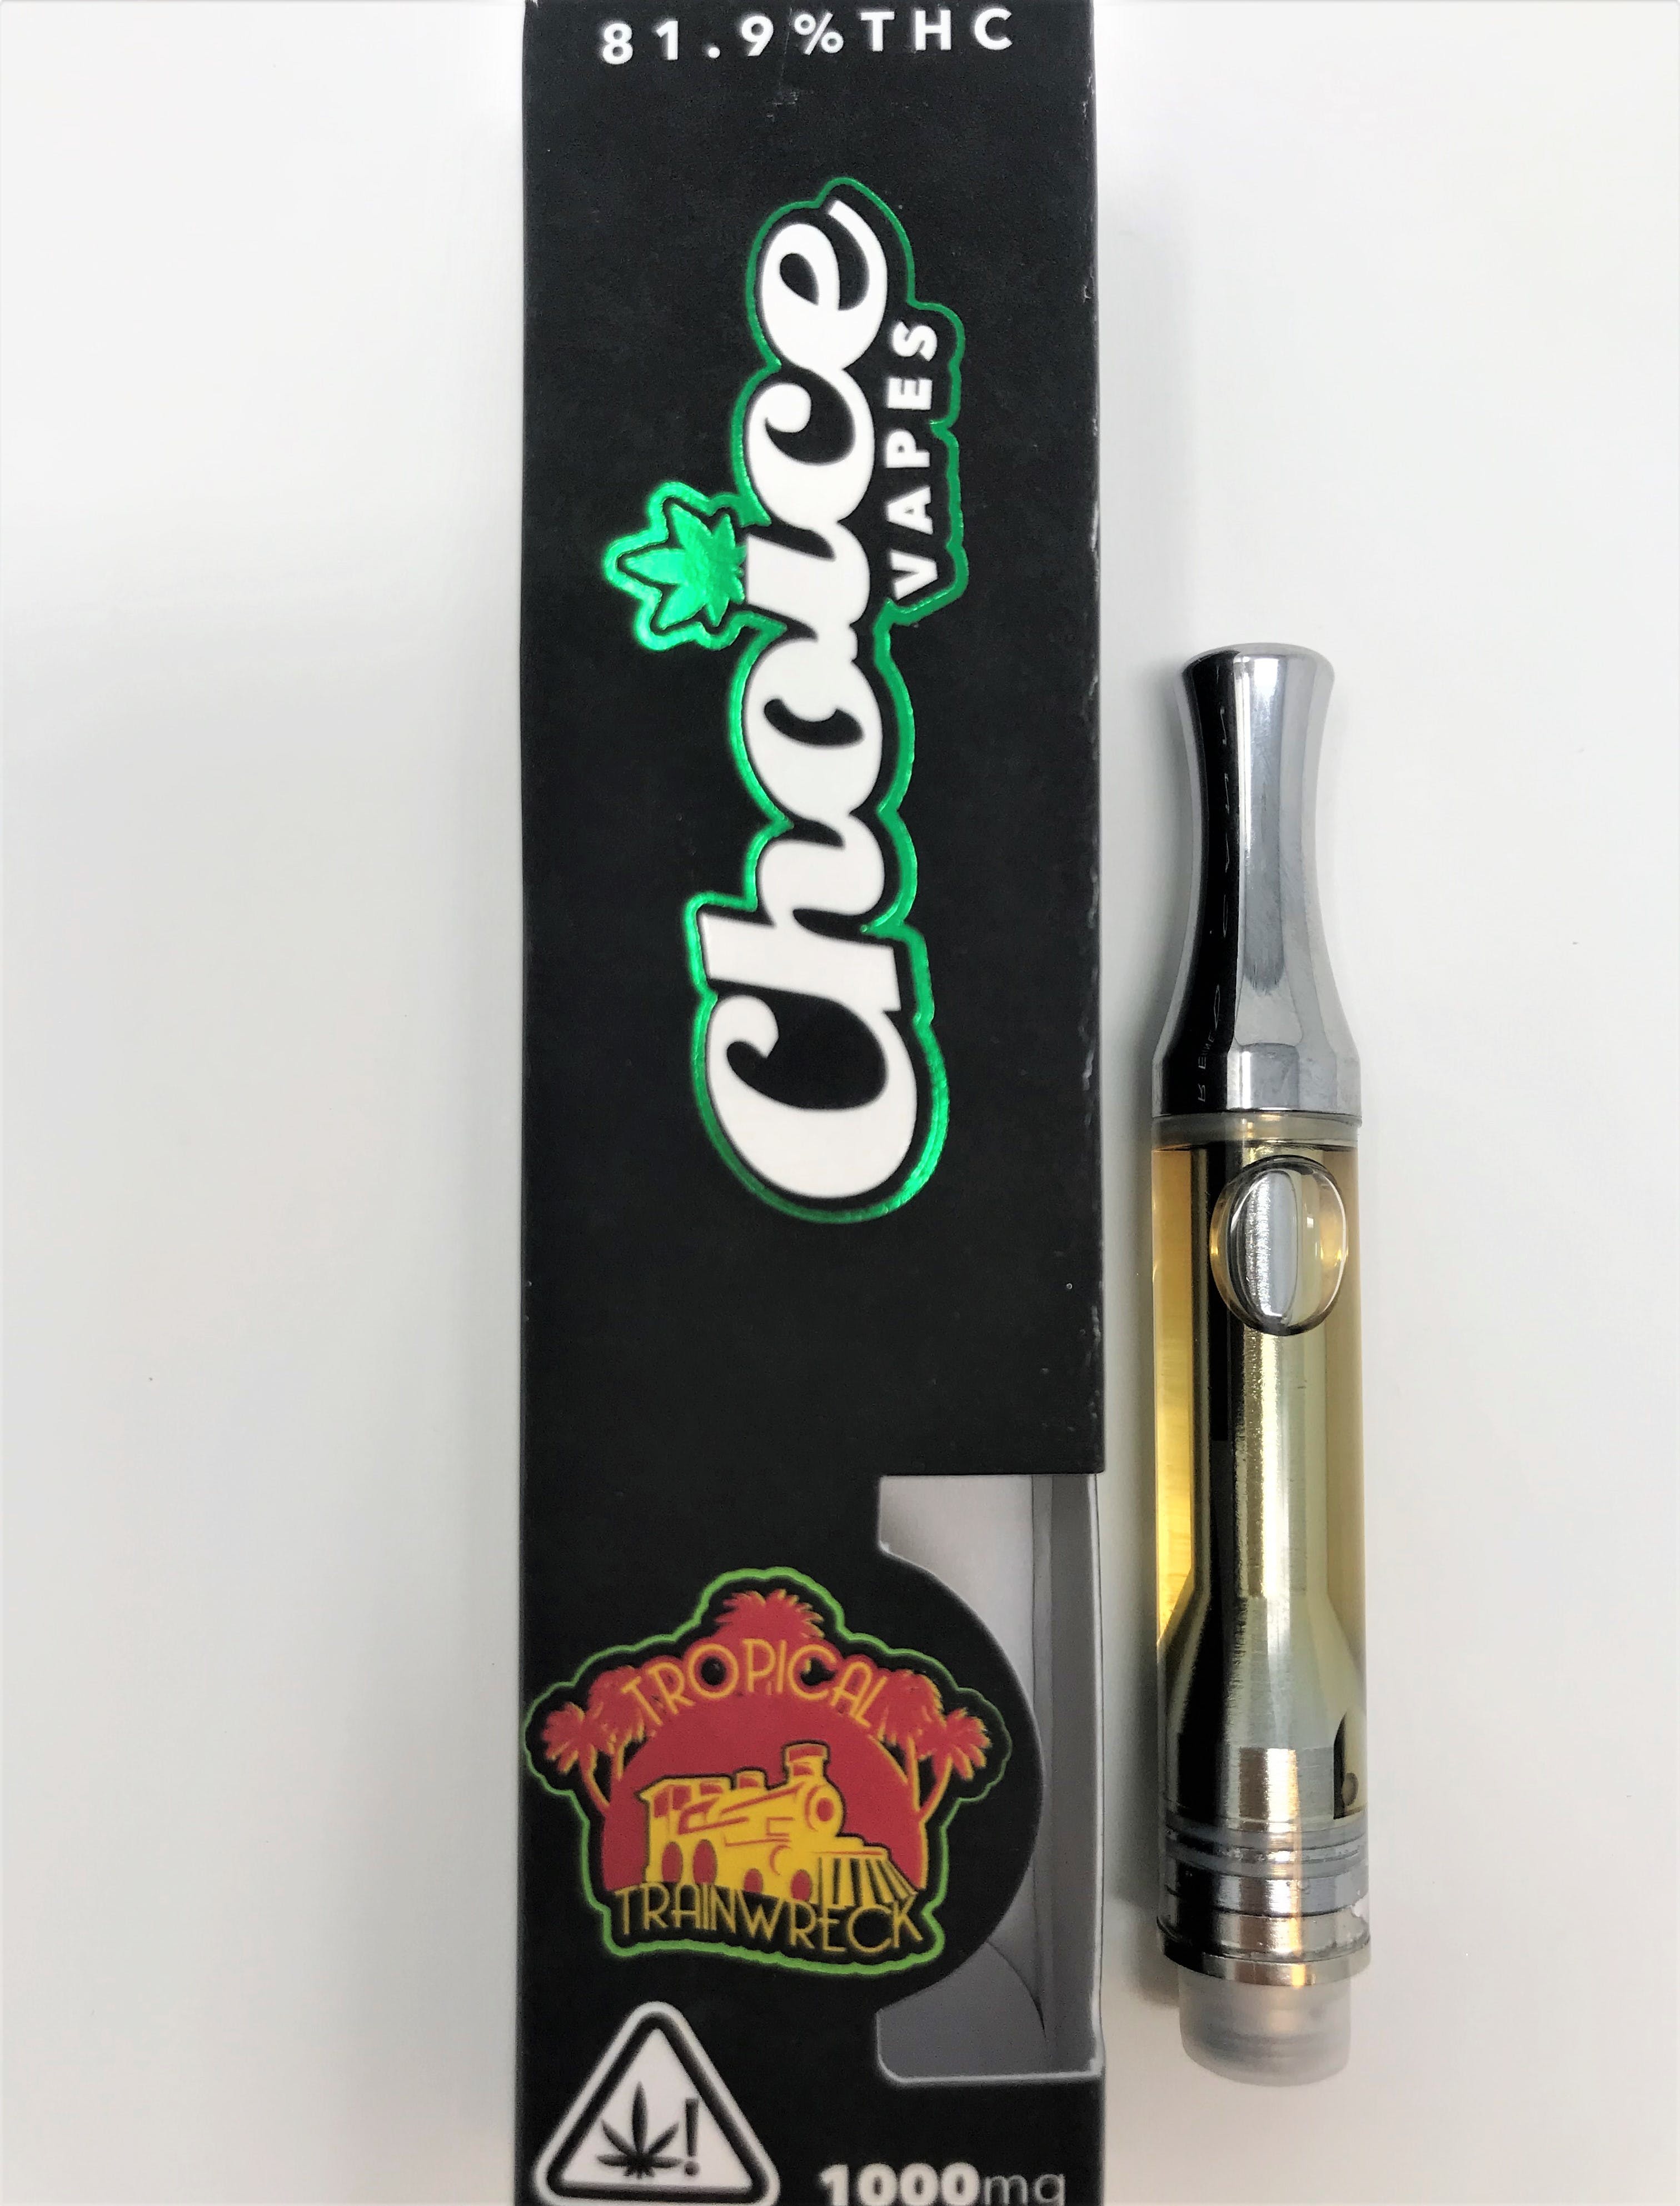 concentrate-choice-vapes-tropical-trainwreck-cartridge-81-9-25